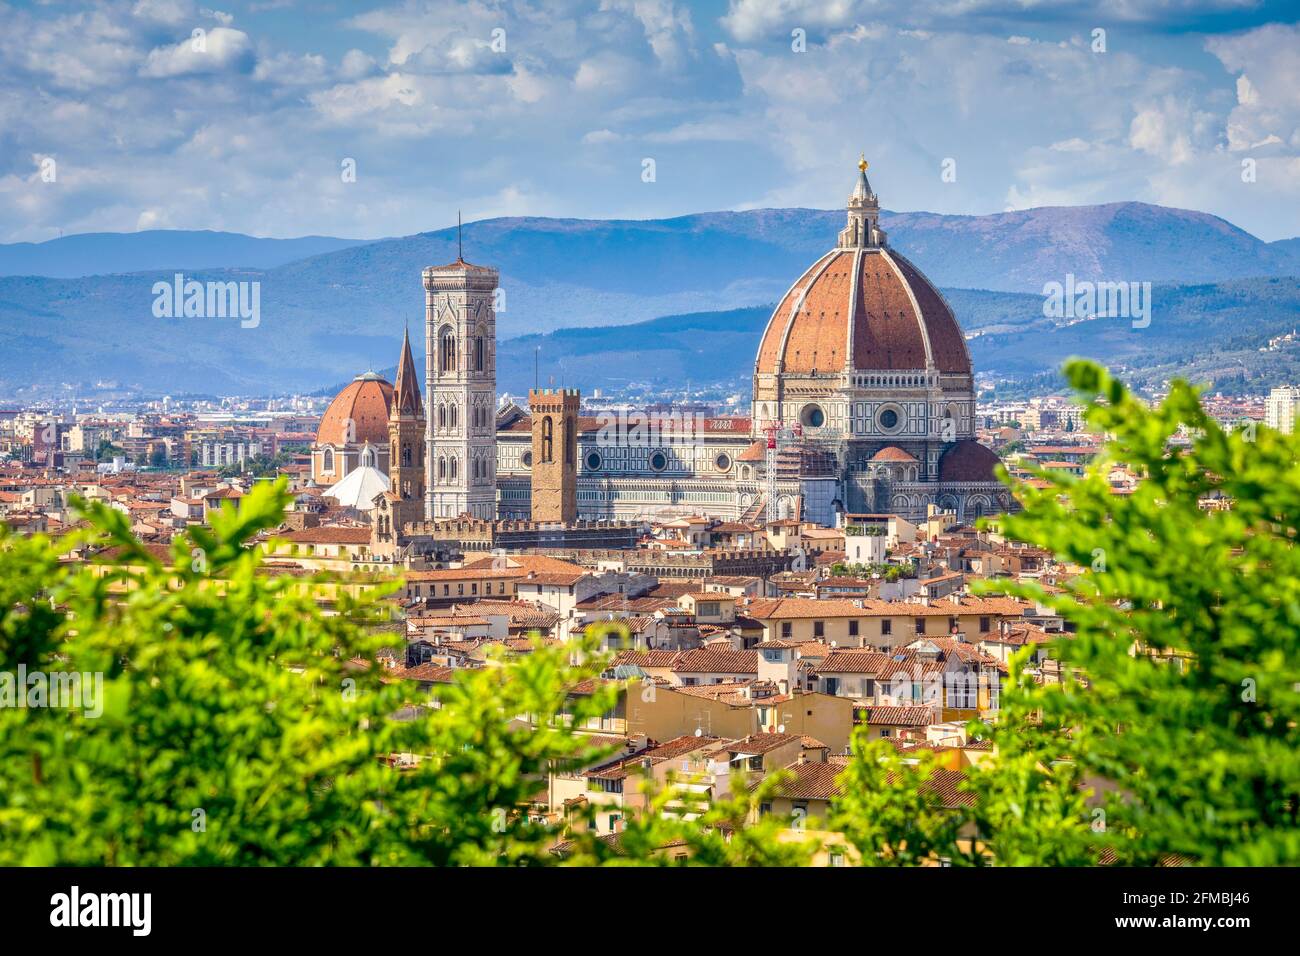 Brunelleschi's Dome, the nave, and Giotto's Campanile of the Cathedral of Saint Mary of the Flower as seen from Michelangelo Hill, Florence, Tuscany, Italy, Europre Stock Photo